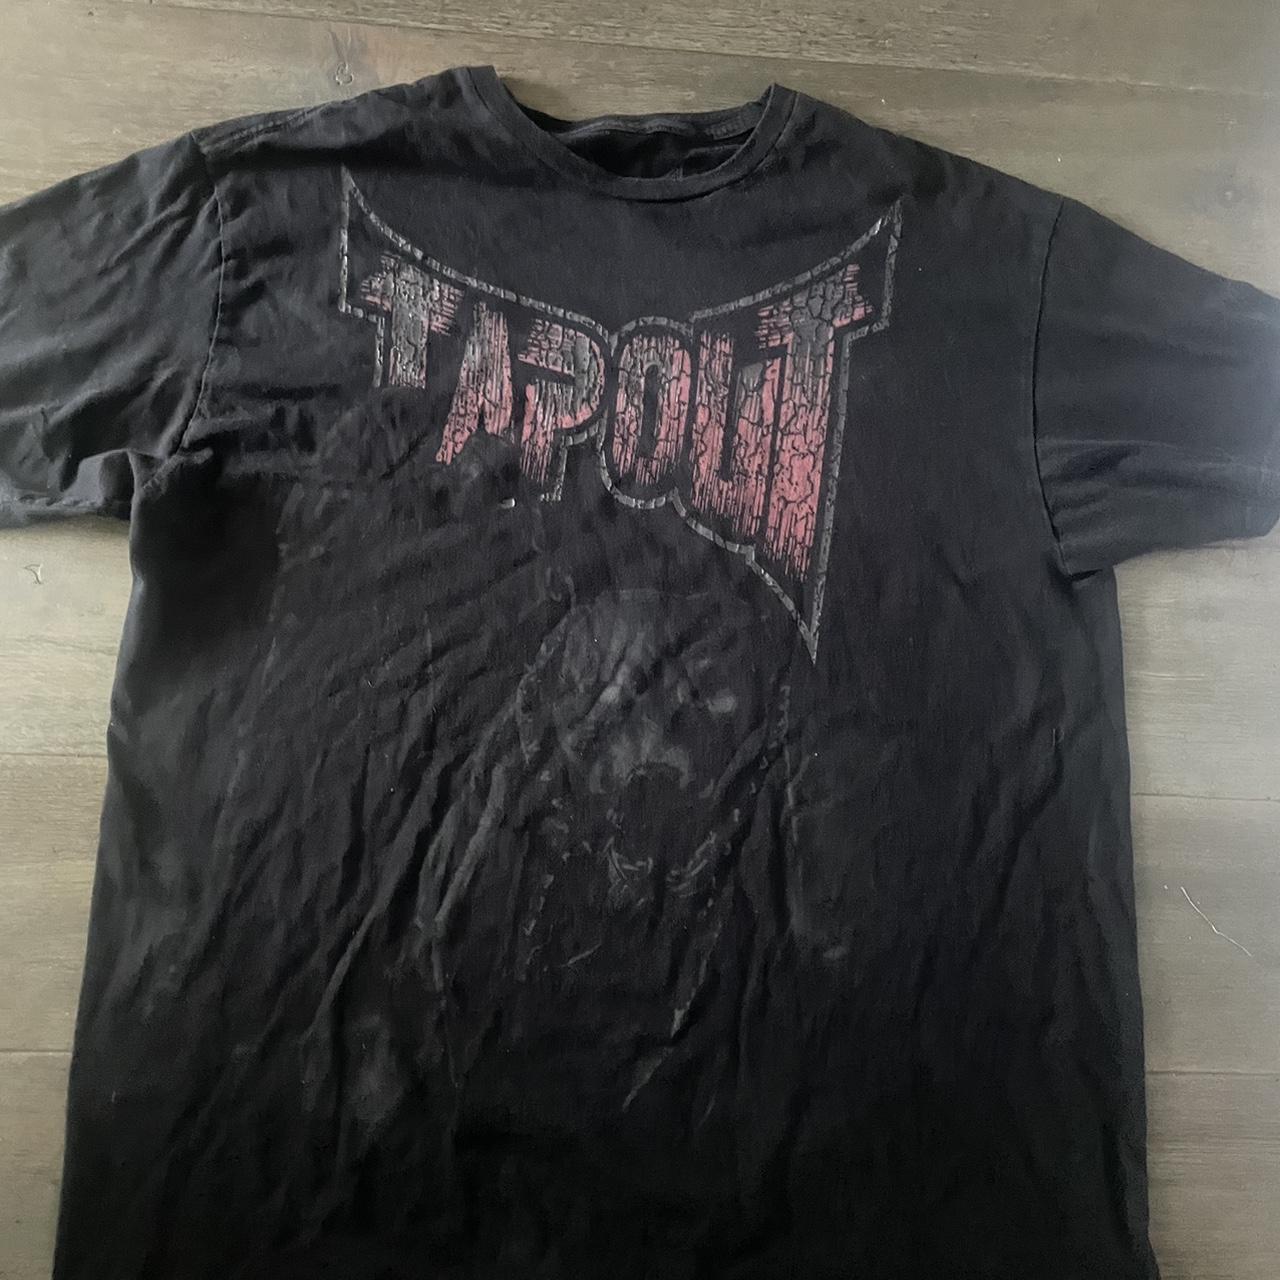 Insane Tapout Dog Print Extremely Rare XL fits... - Depop